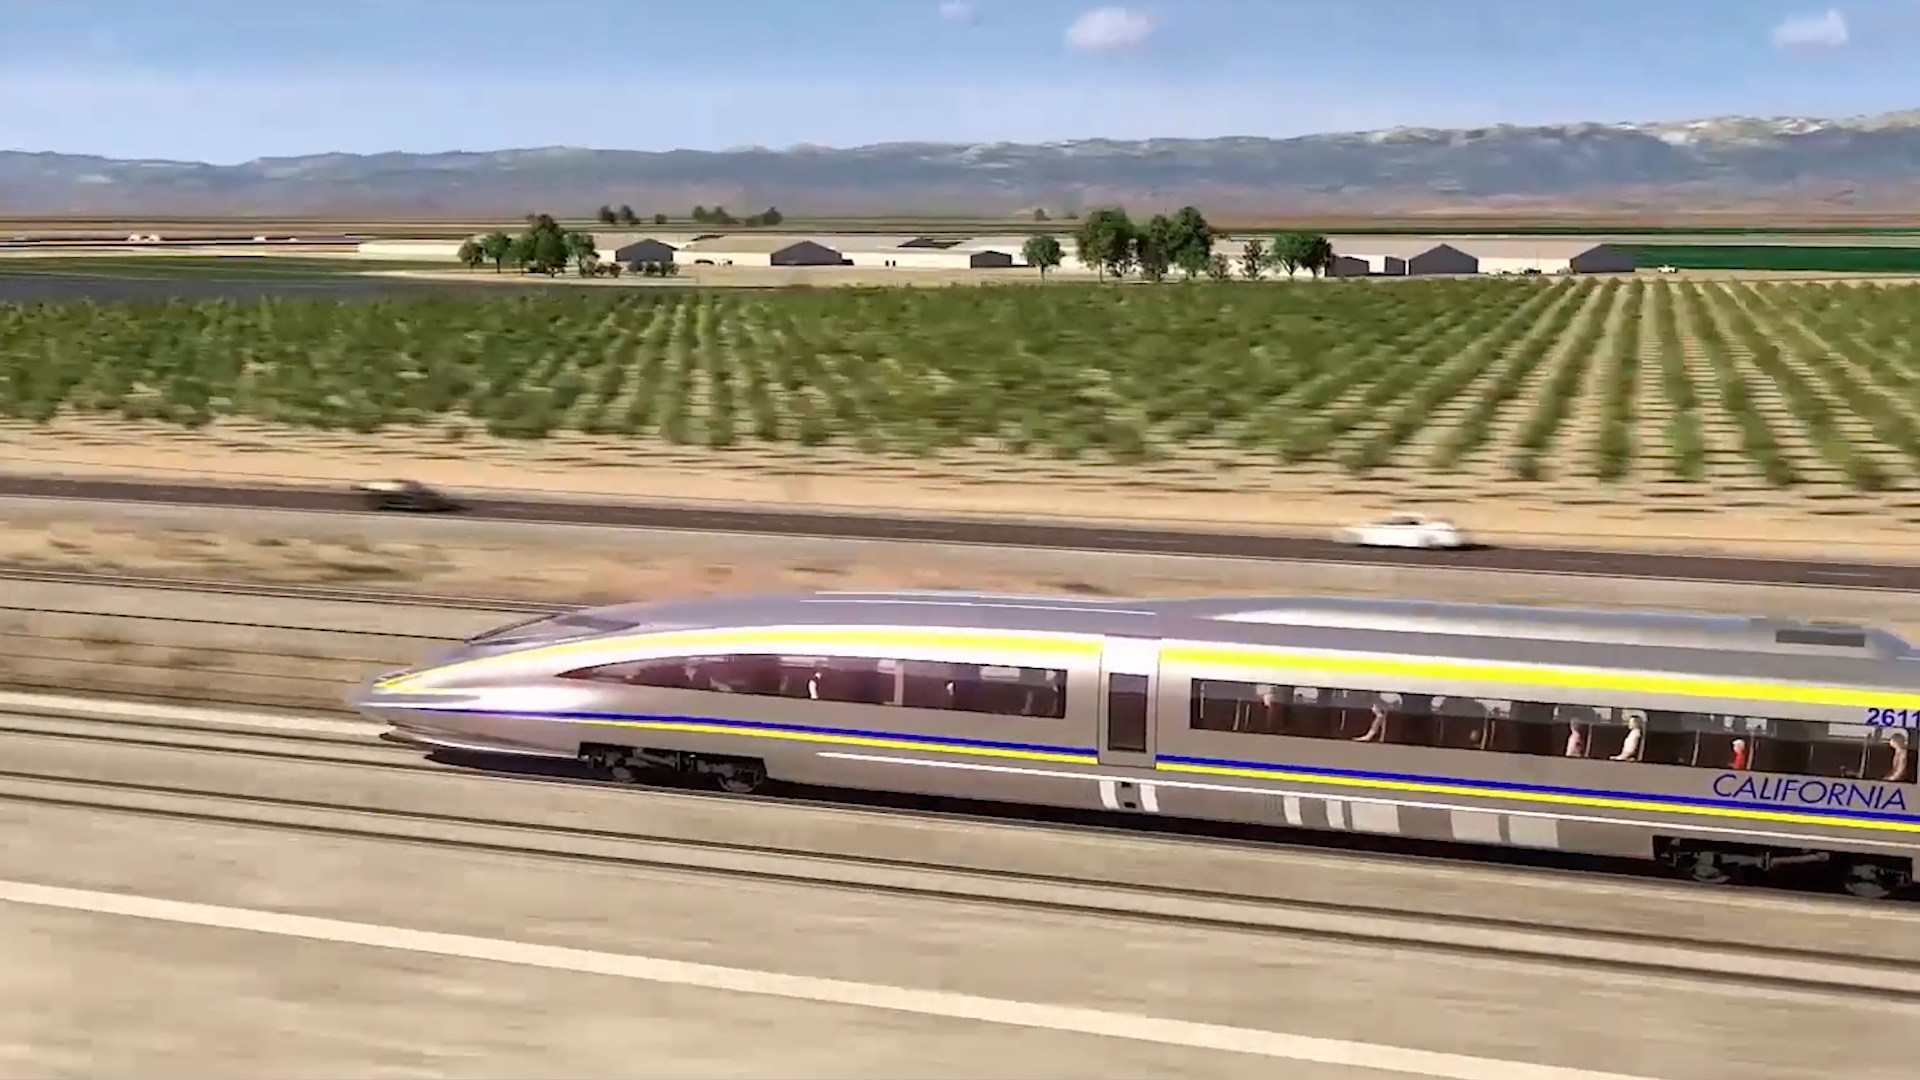 California High Speed Rail project pushes forward in spite of delays